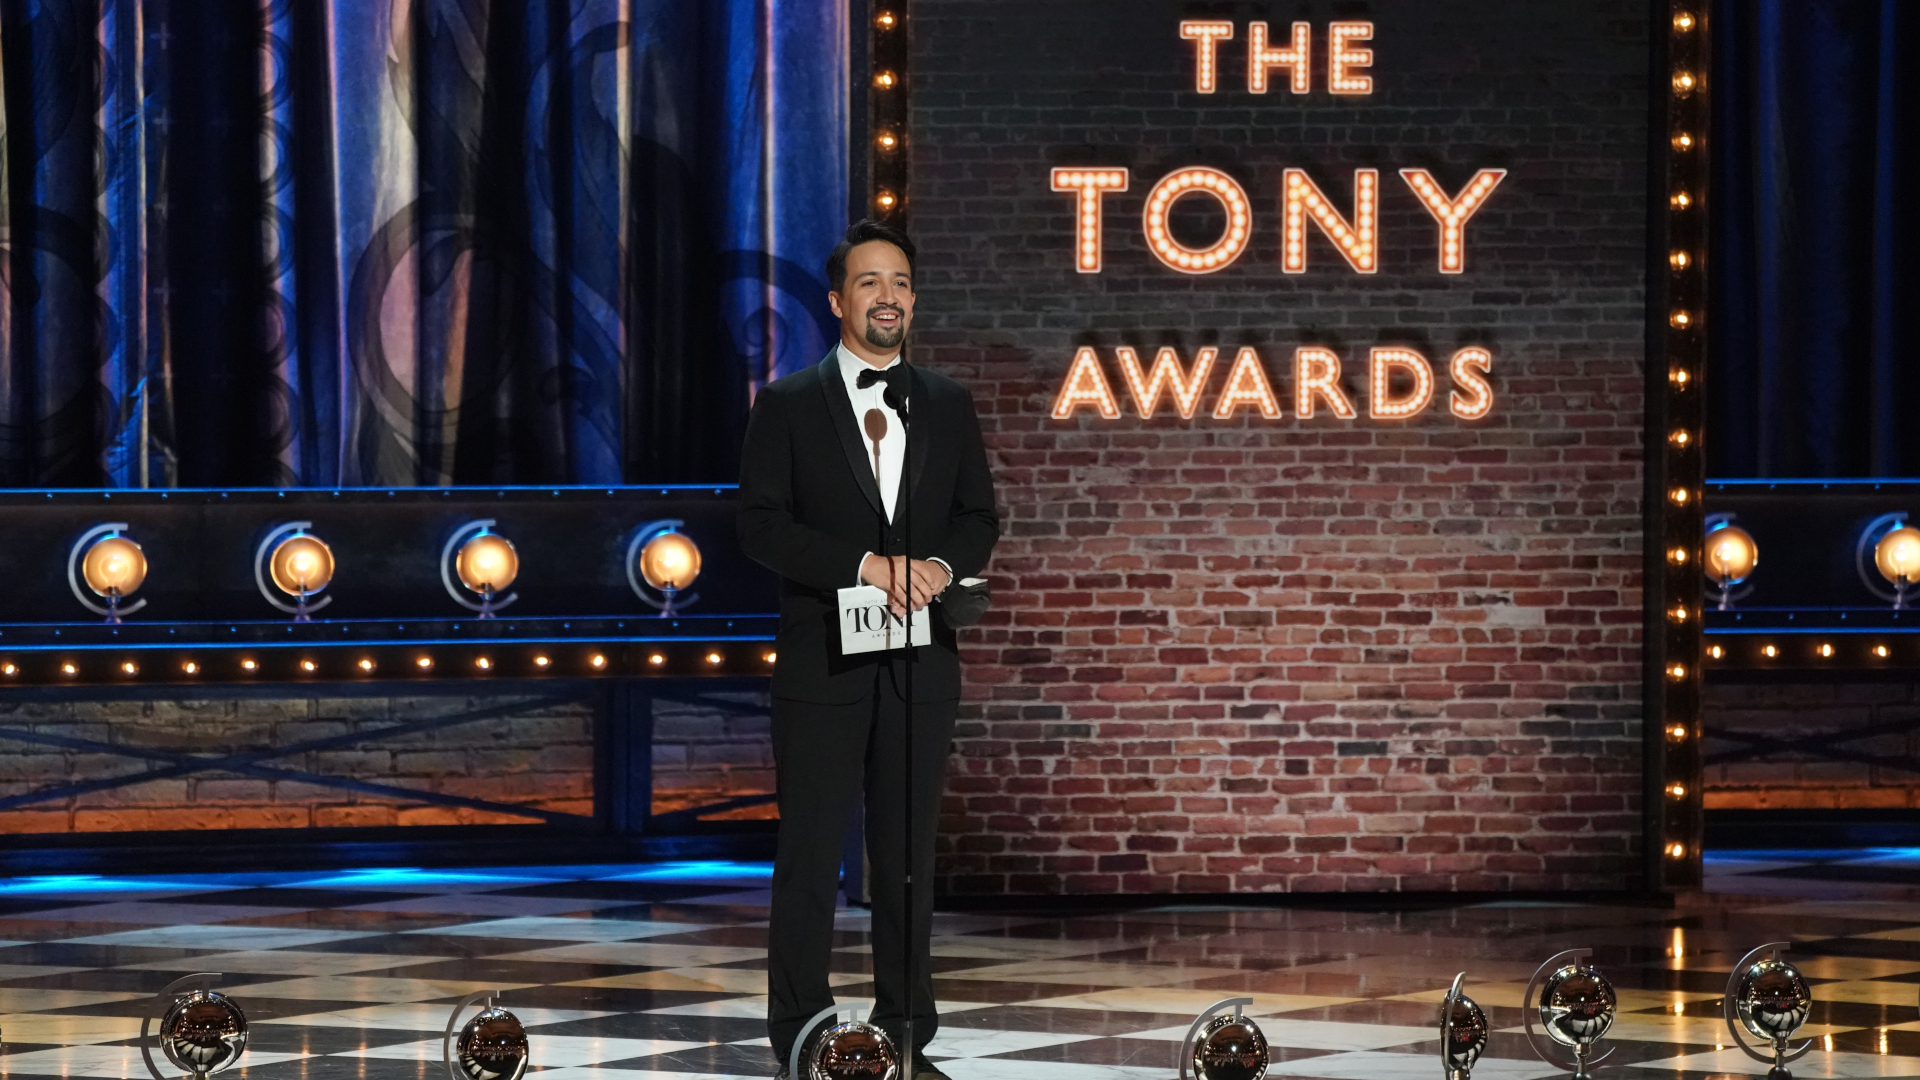 How to watch the Tony Awards live stream the show and ceremony online